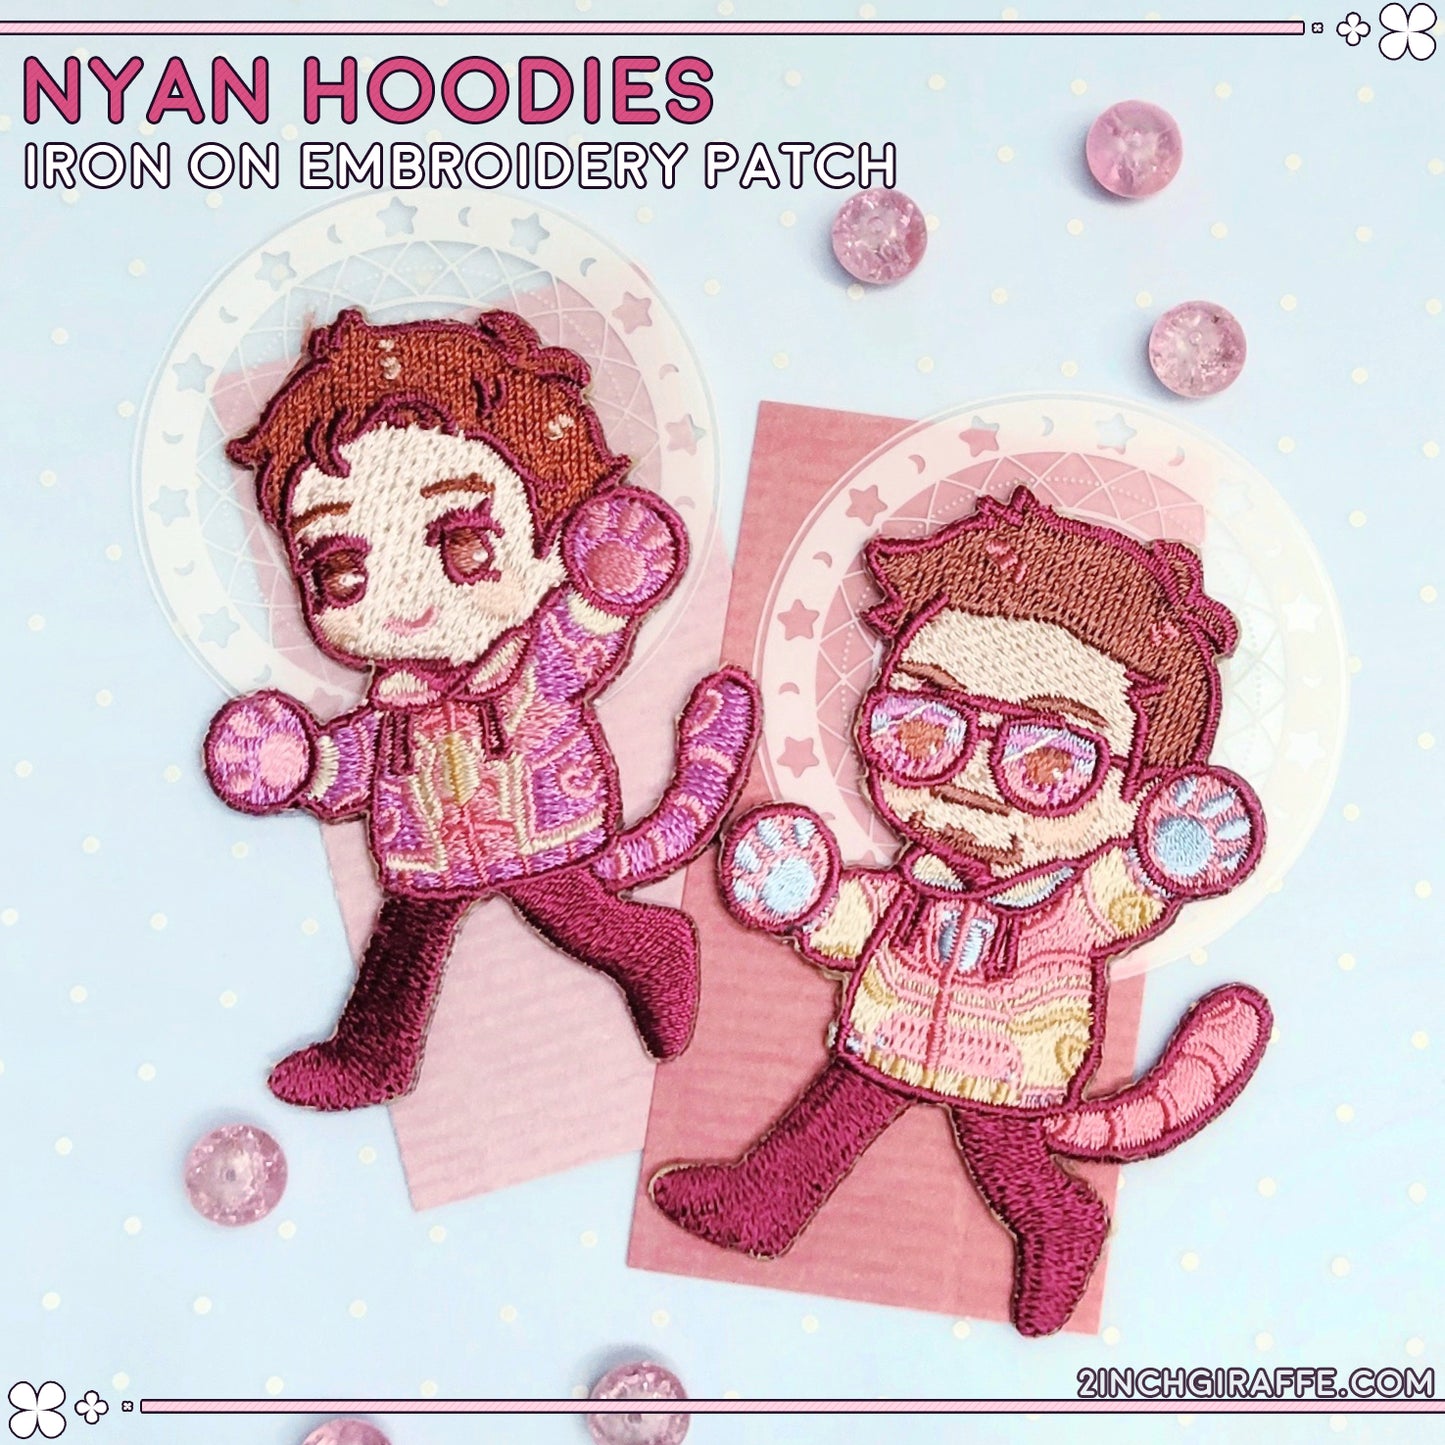 Nyan Hoodies Embroidery Patch